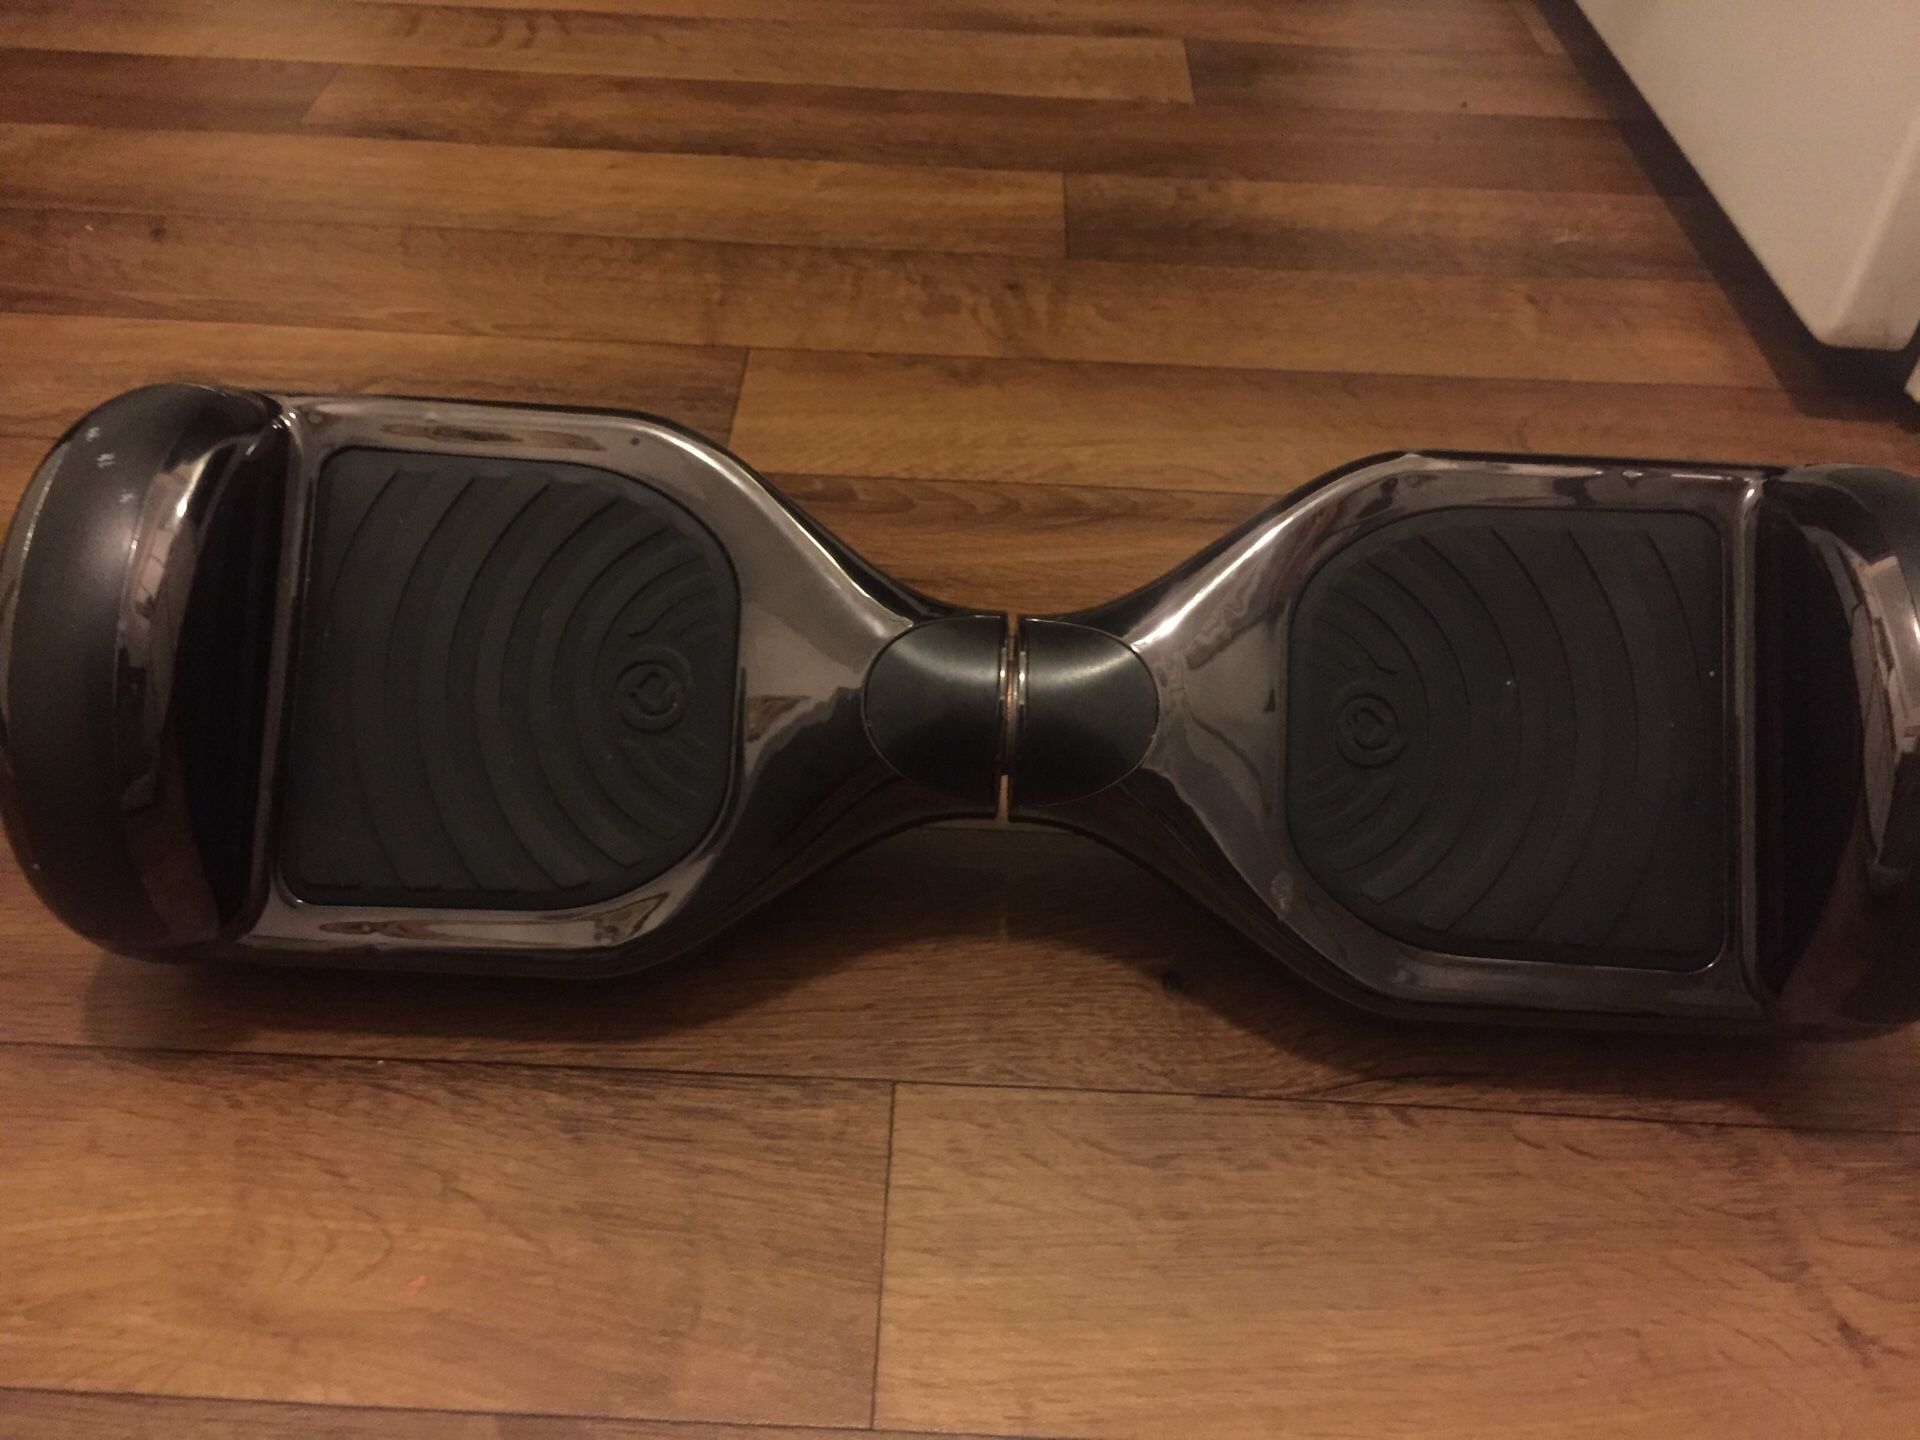 Used hoverboard